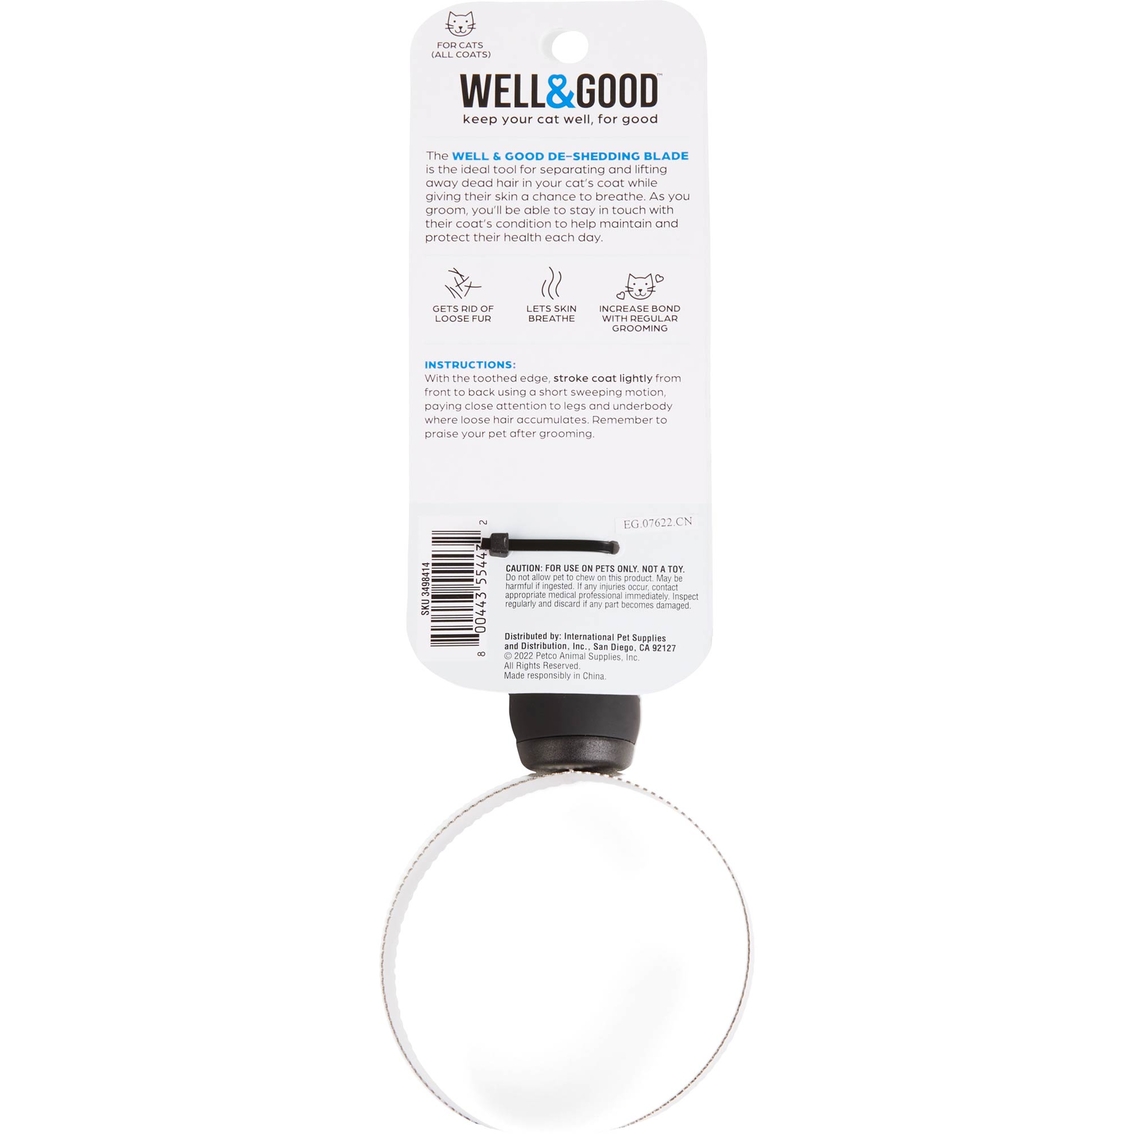 Well & Good Deshedding Cat Blade, 8 in. L x 3 in. W - Image 2 of 3